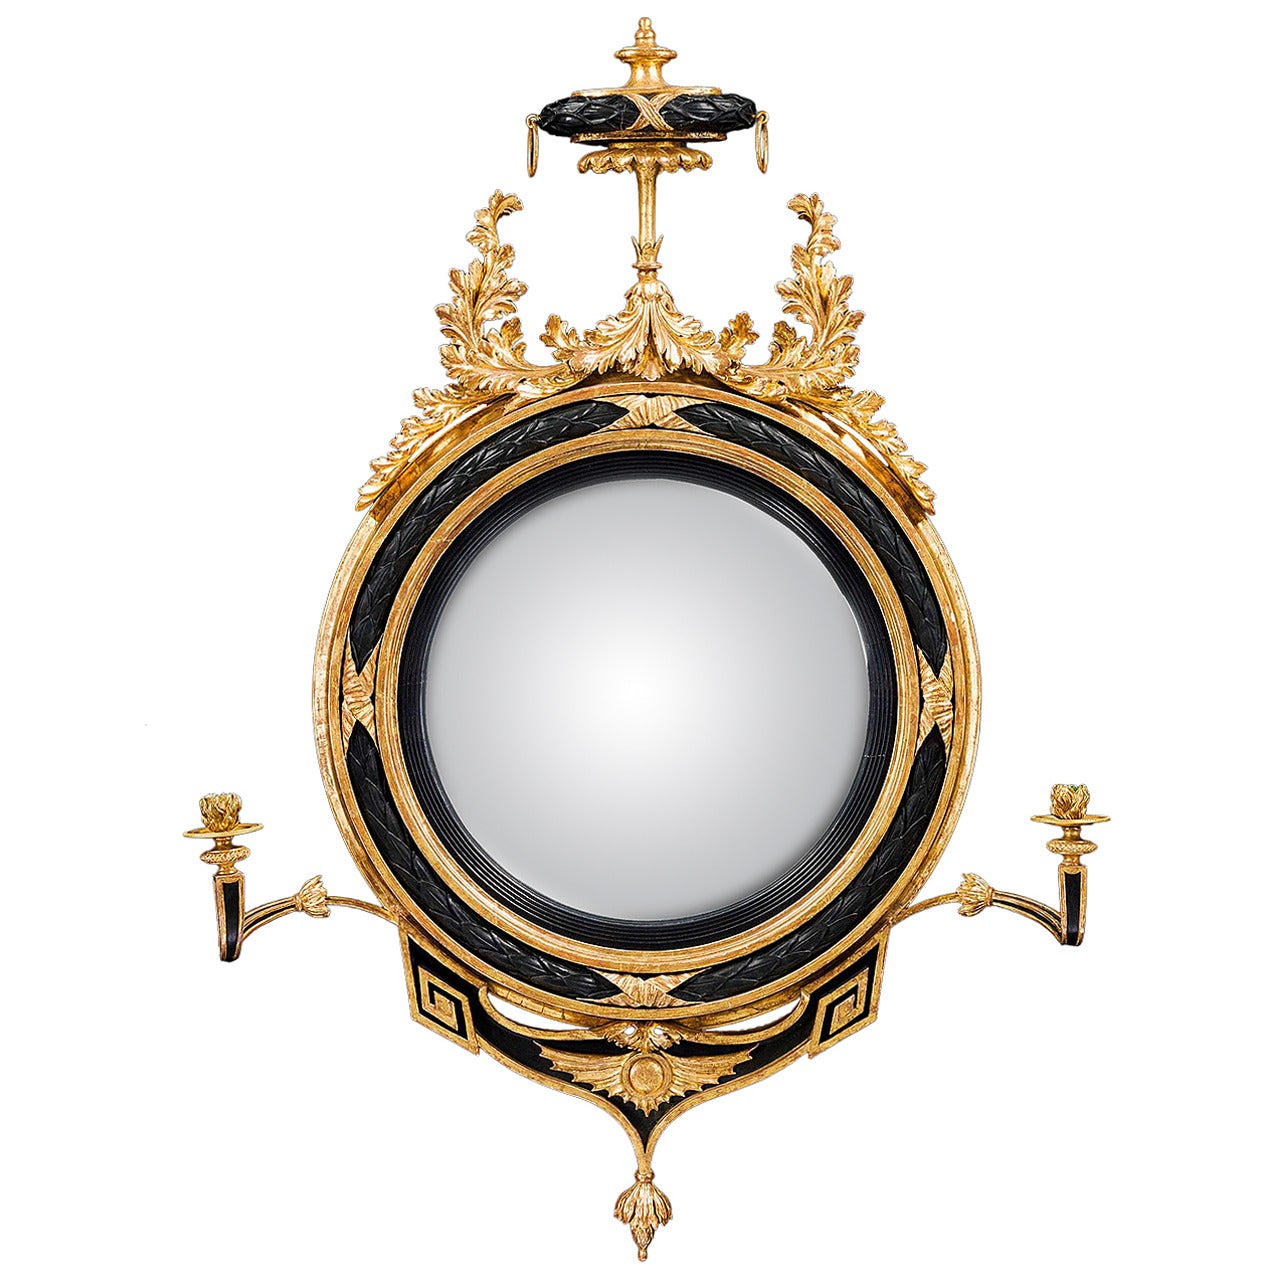 Regency Period Convex Mirror with Ebonized and Giltwood Decoration